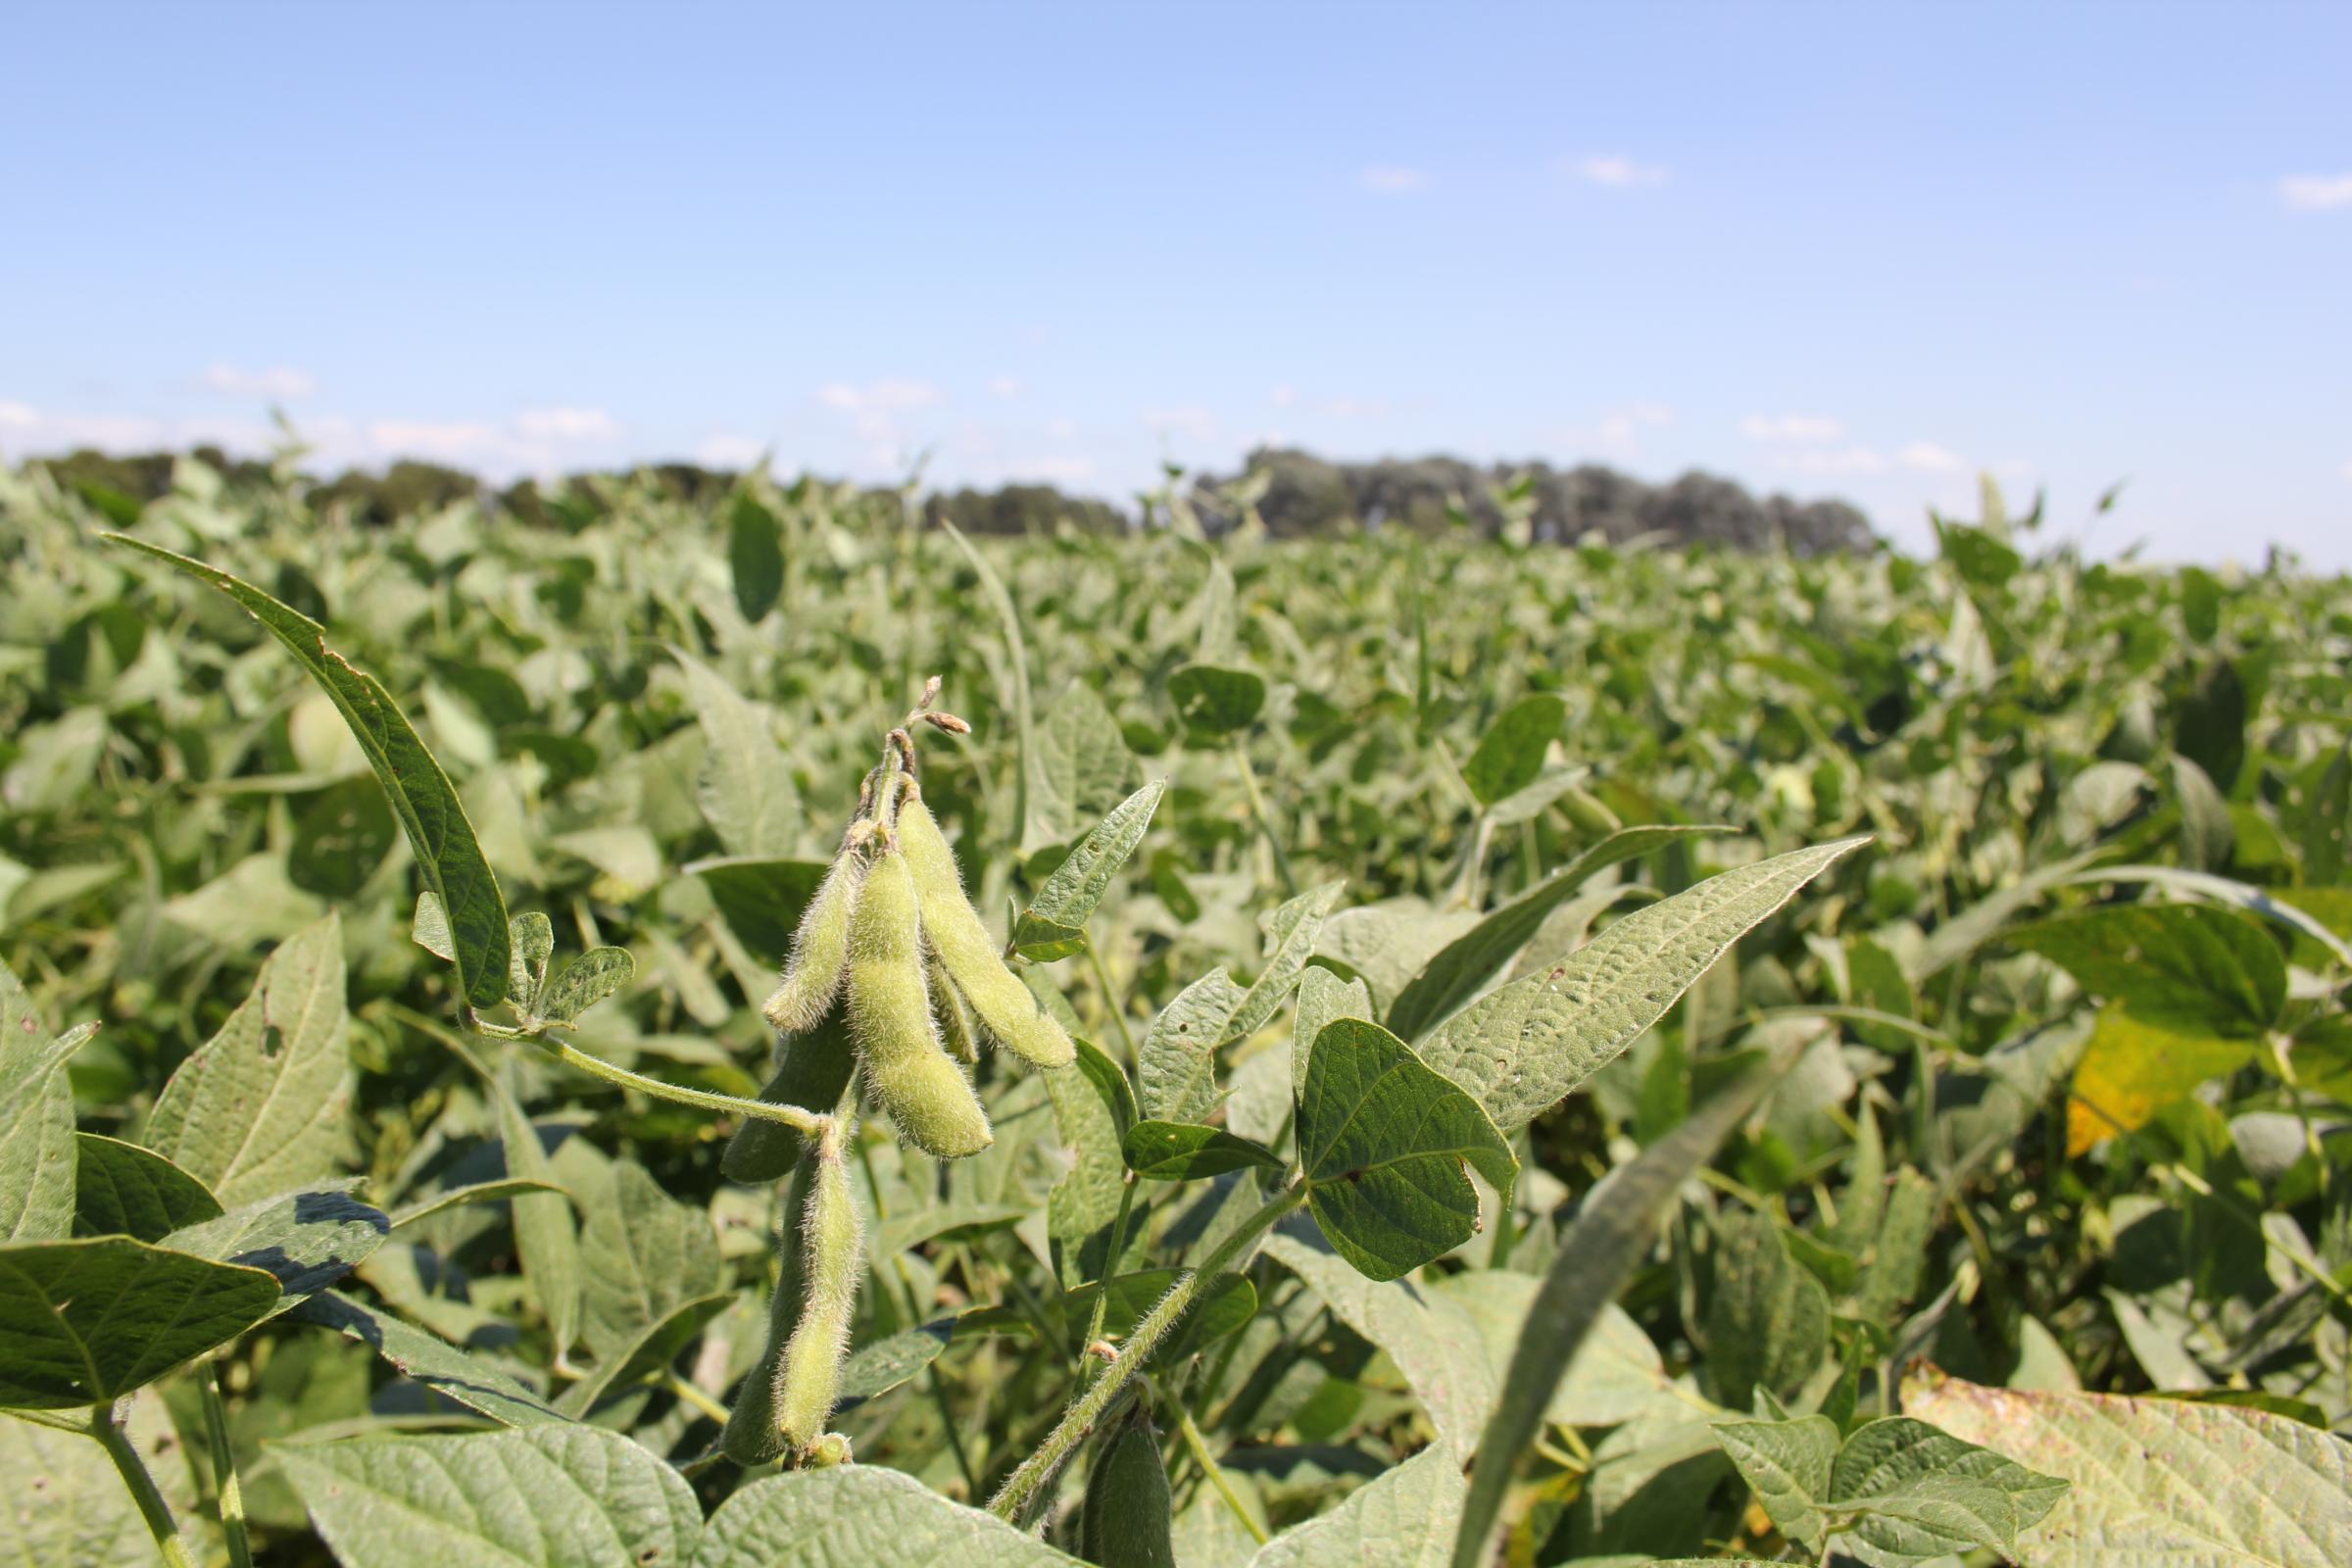 Roseville MN News, Calyxt produces a high-oleic soybean in Roseville